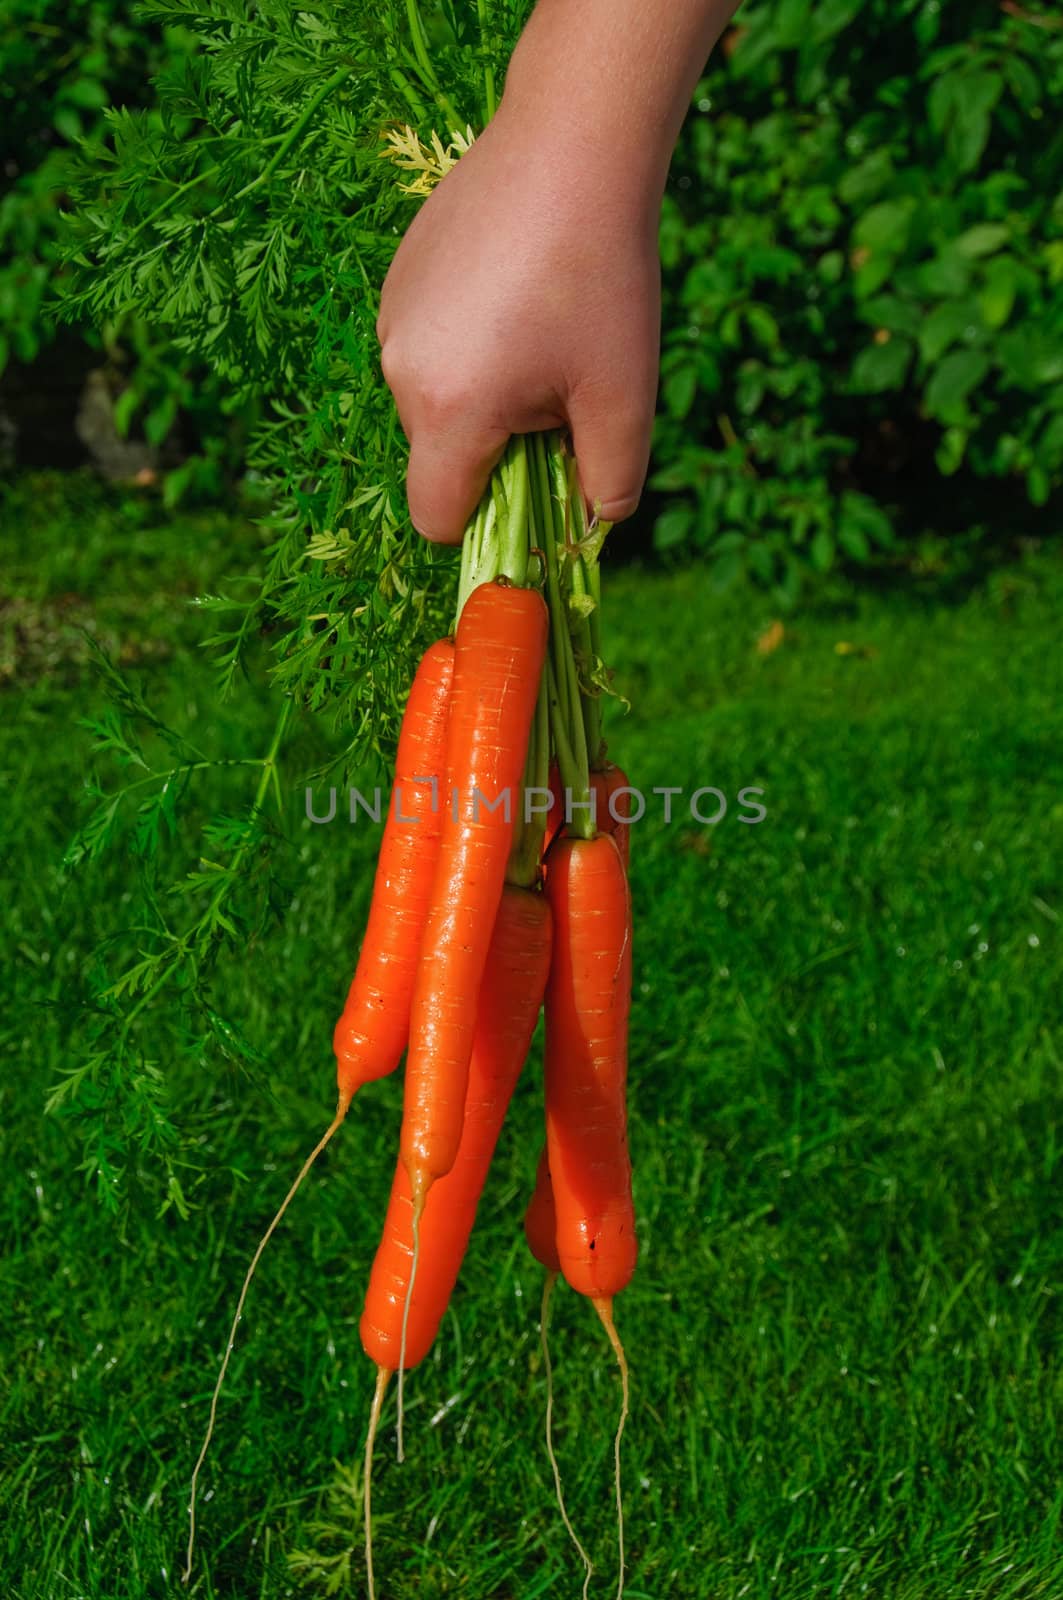 Harvesting  carrots by GryT